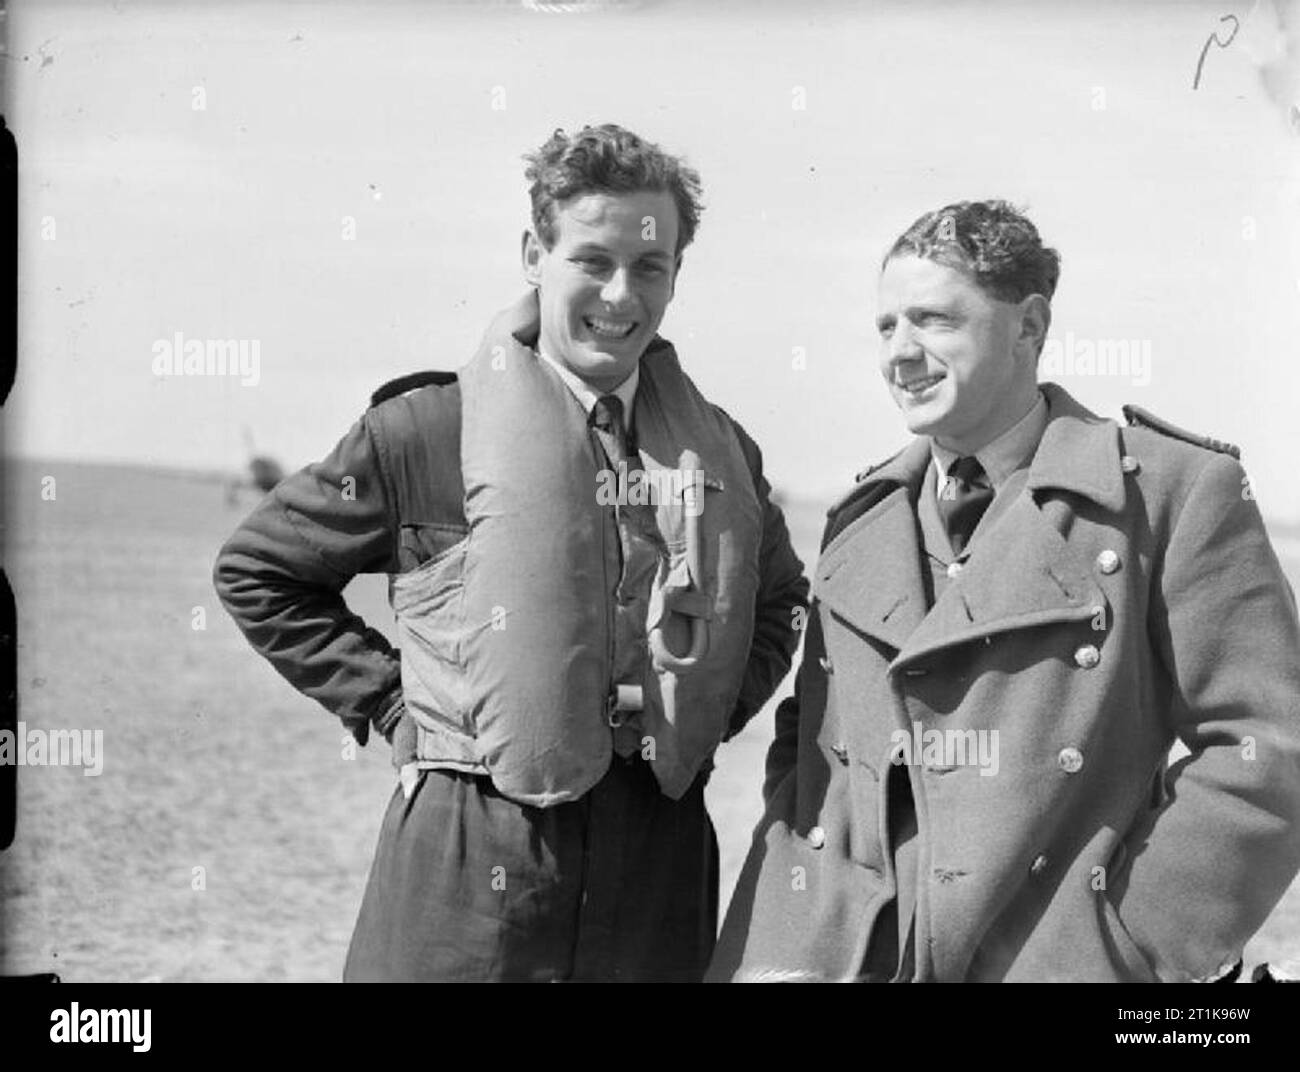 Royal Air Force Fighter Command, 1939-1945. Flight Lieutenants P W Townsend (left) and C B Hull of No. 43 Squadron RAF at Wick, Caithness, at the time they had shot down three enemy aircraft each. Hull became the commanding officer of the Squadron in September 1940 and was killed in action on 7 September having shot down at least 10 enemy aircraft. Townsend was to end his flying service with at least 11 victories, having commanded Nos. 85 and 605 Squadrons RAF. He then commanded RAF stations at Drem and West Malling, and No. 23 Initial Training Wing, before becoming Equerry of Honour to the Ki Stock Photo